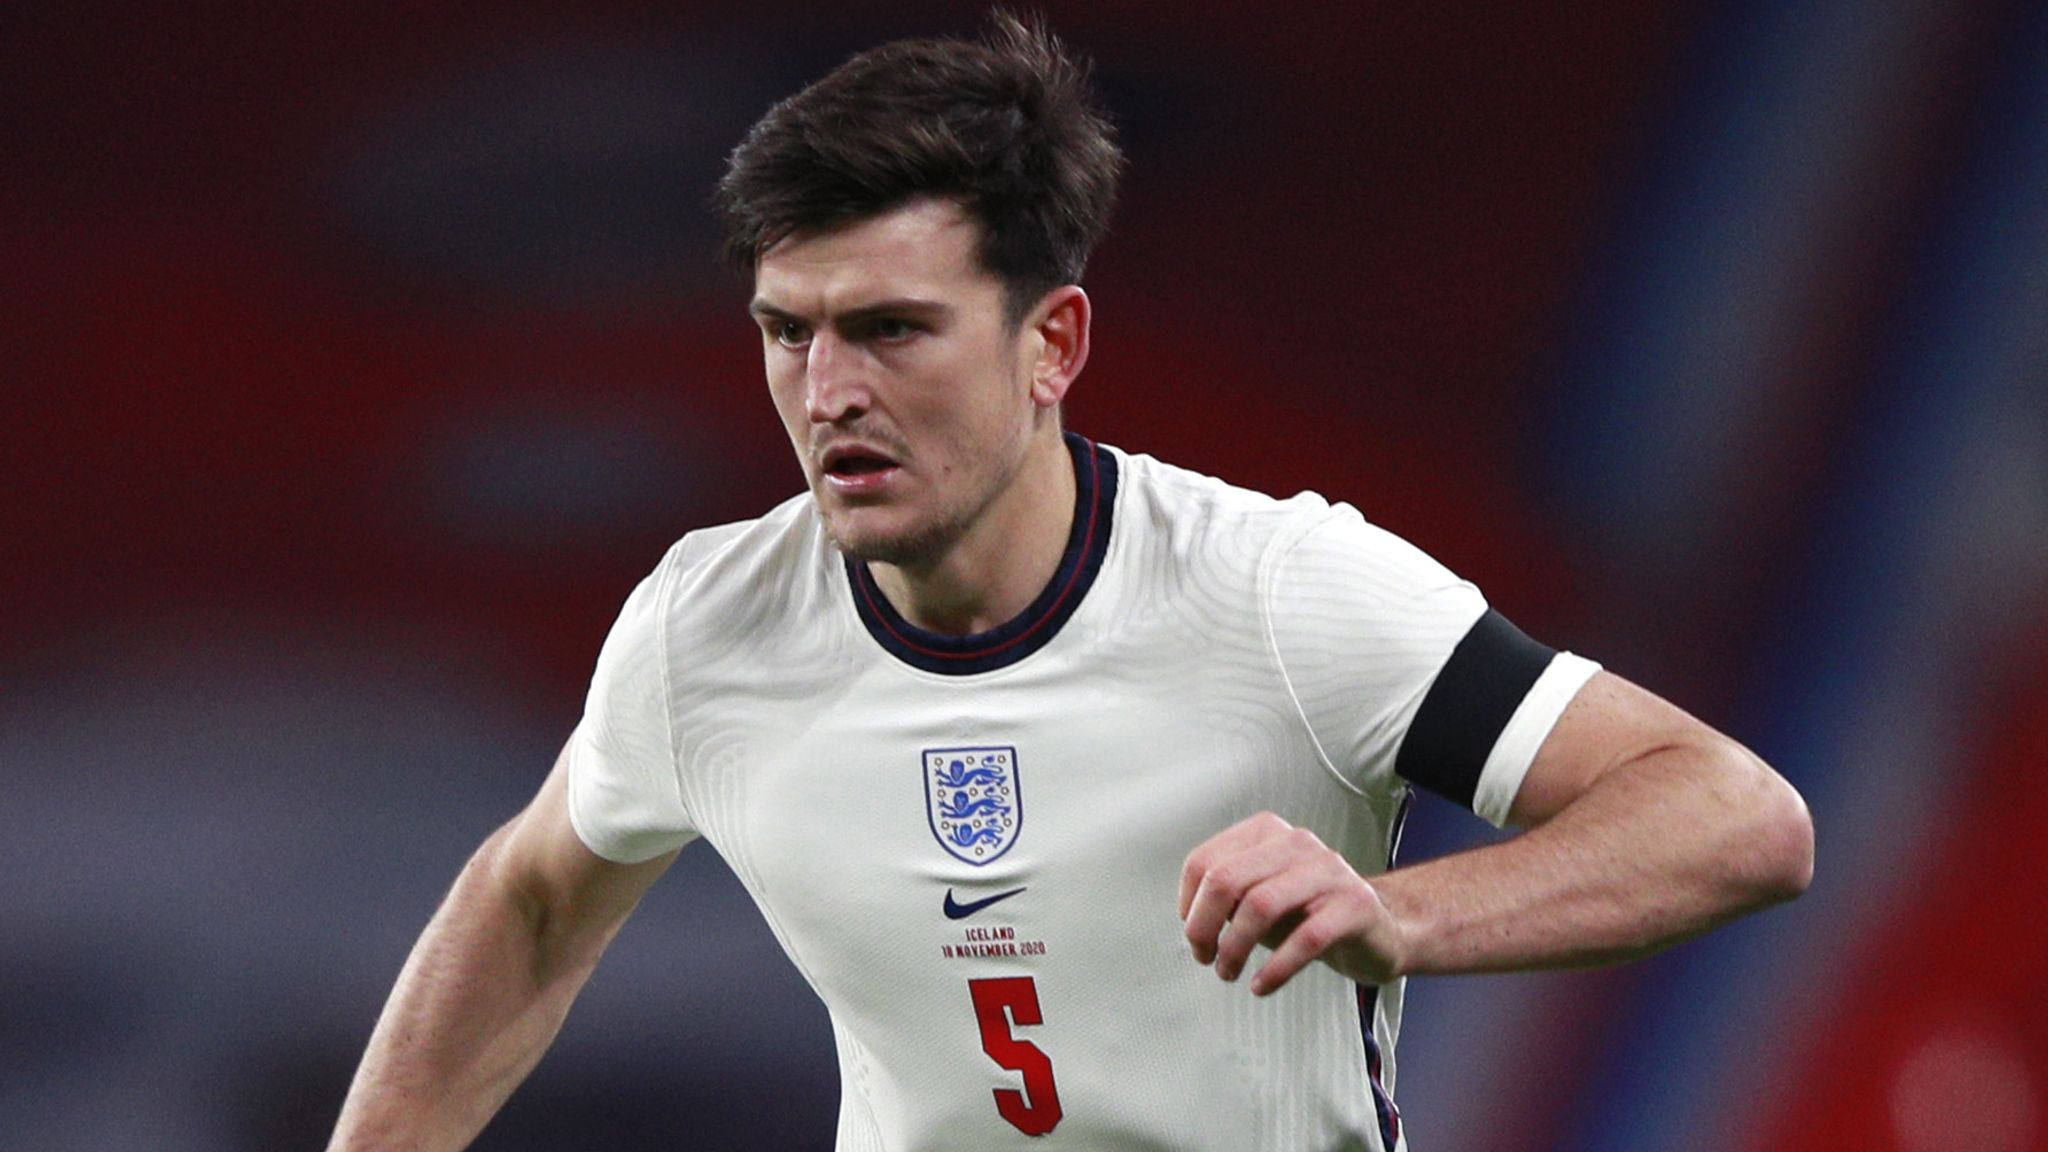 Euro 2020: Maguire Declares Self Fit For Scotland Game